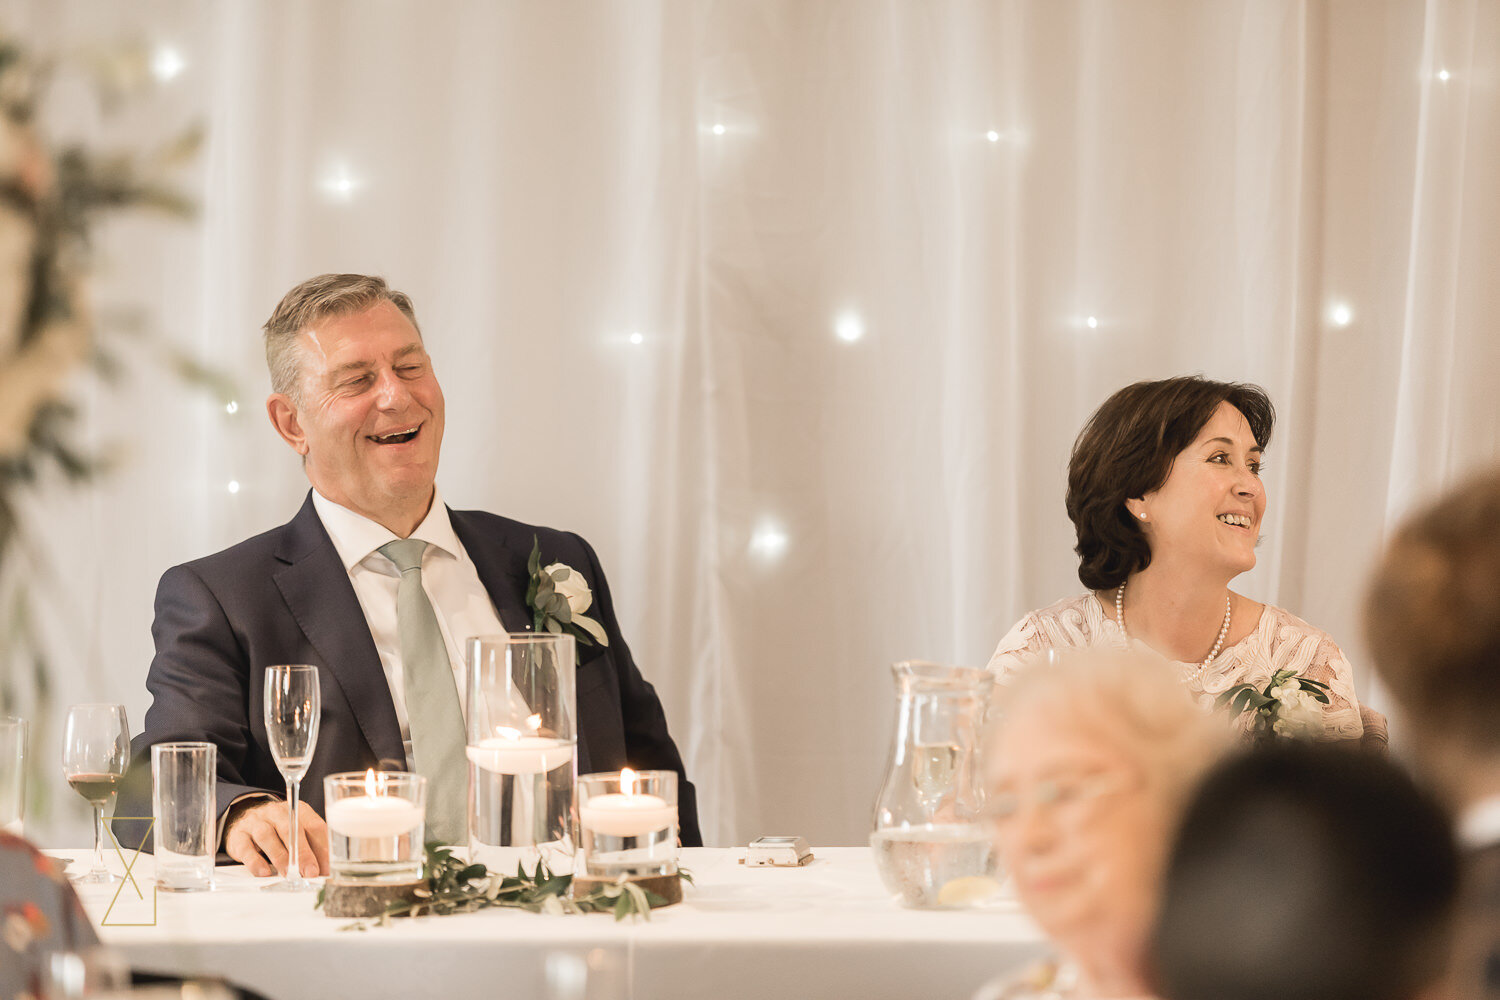 Father-of-the-bride-laughs-at-speech